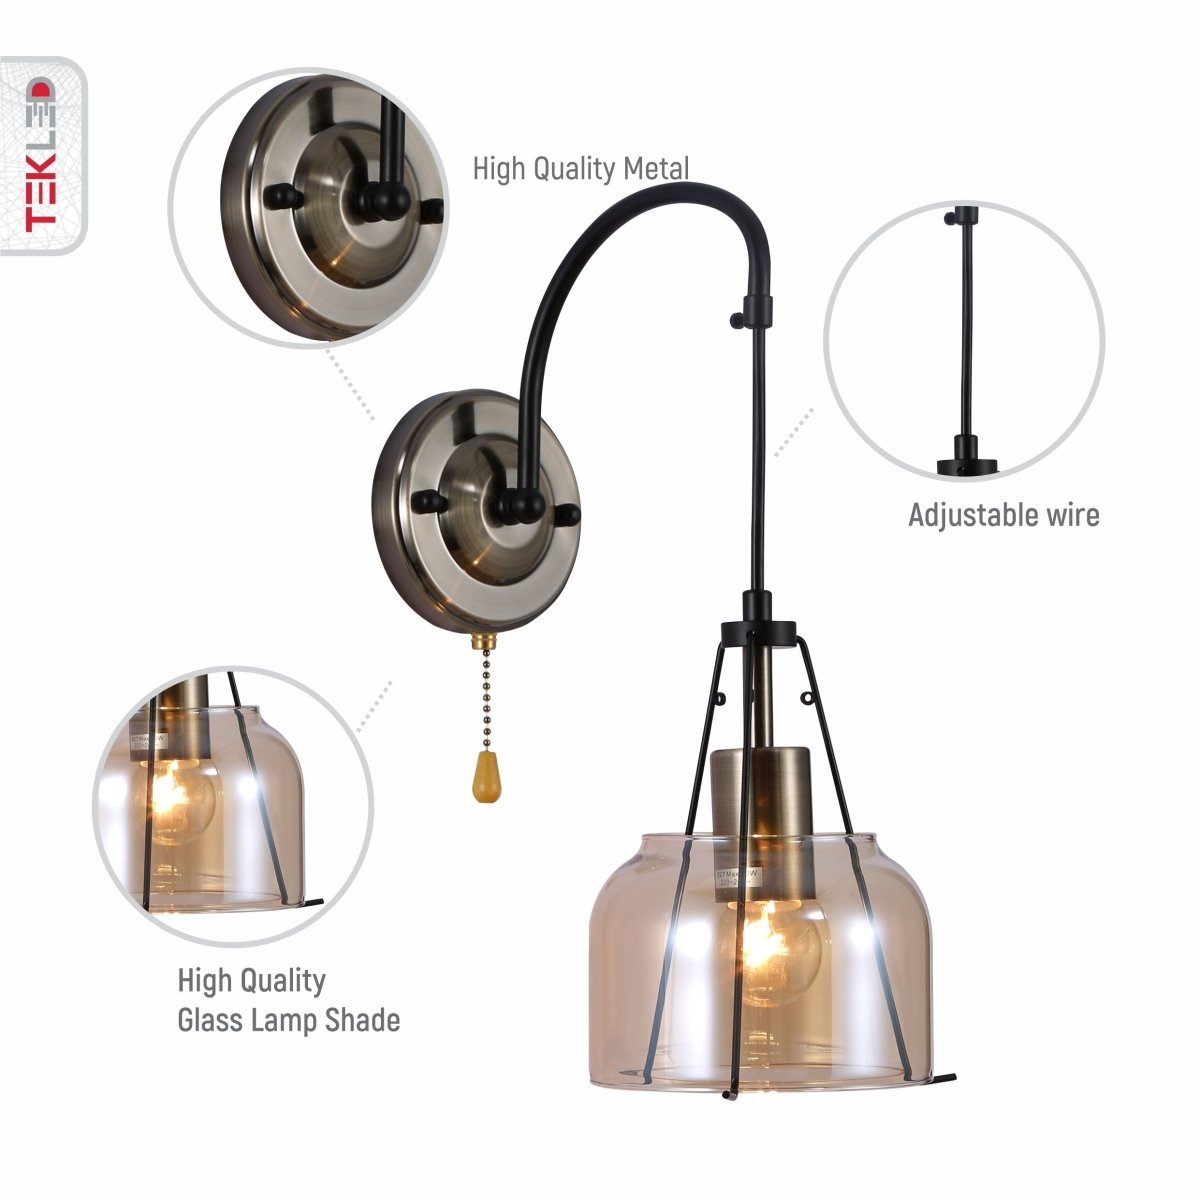 Features of amber glass pendant wall light e27 and pull down switch